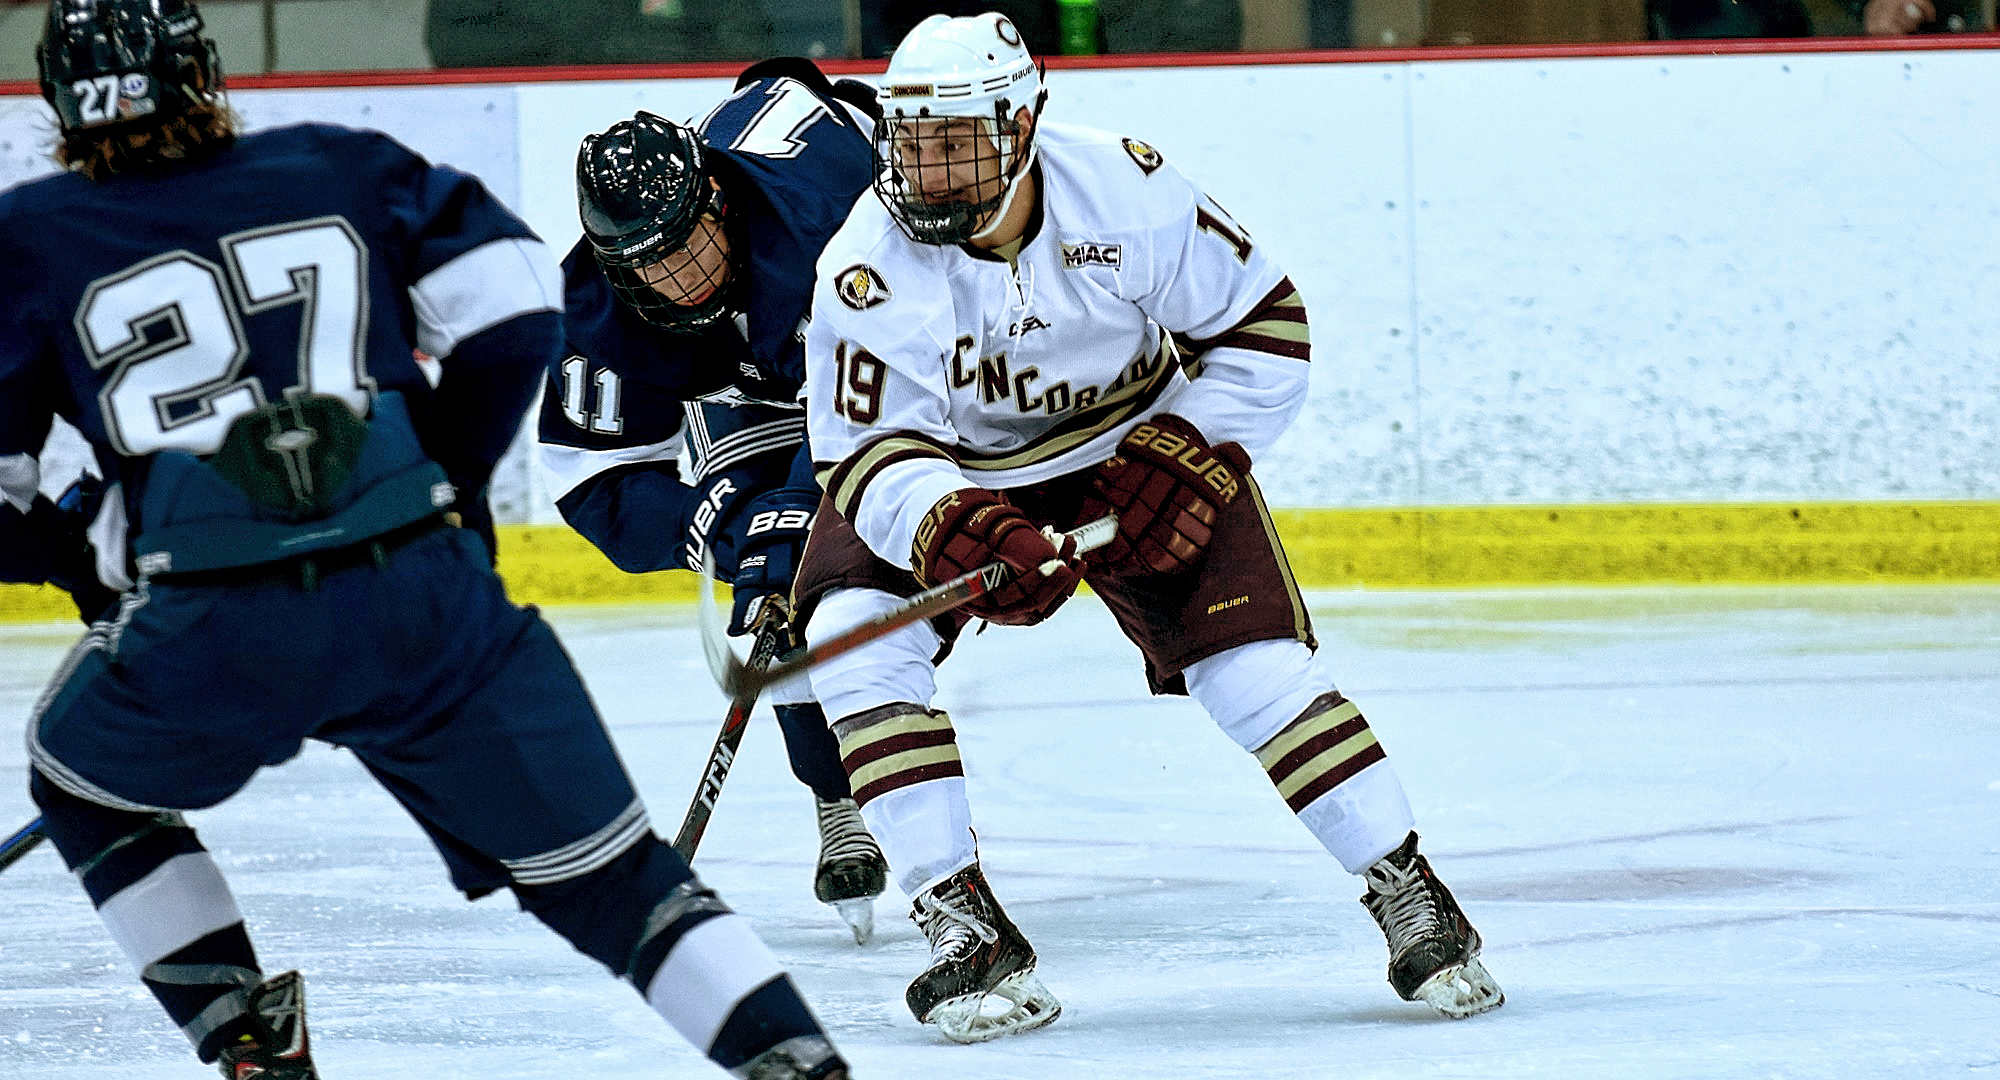 Tyler Bossert had two assists in the Cobbers' loss at St. Mary's and now has 31 points on the season. He leads DIII in assists and is second in points.